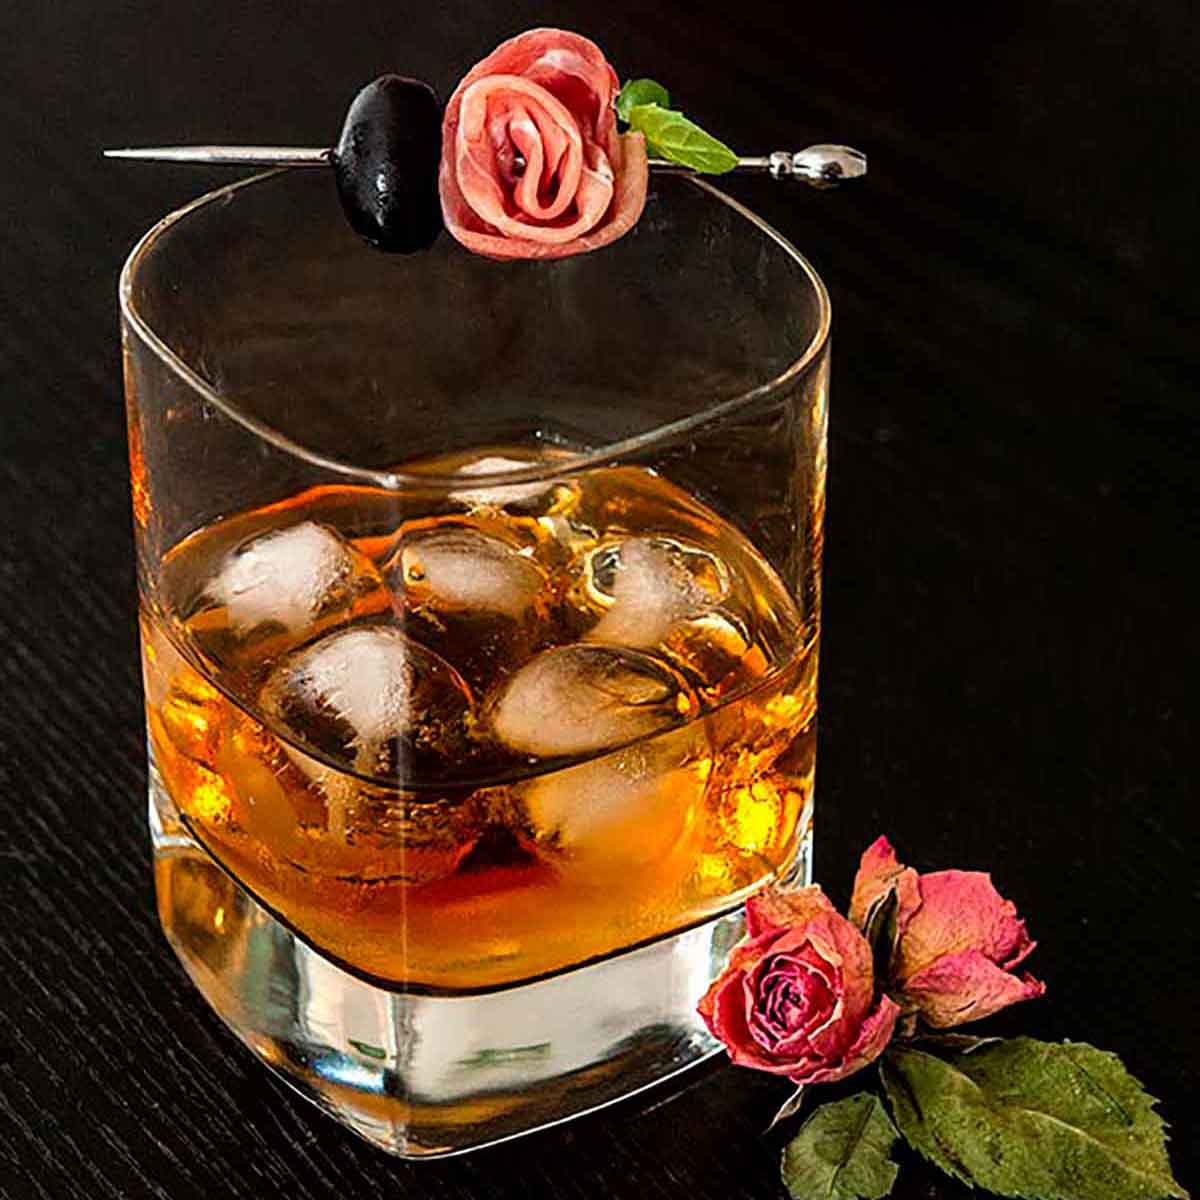 A whisky cocktail on a black table, surrounded by pink roses, garnished with a prosciutto rose and olive.